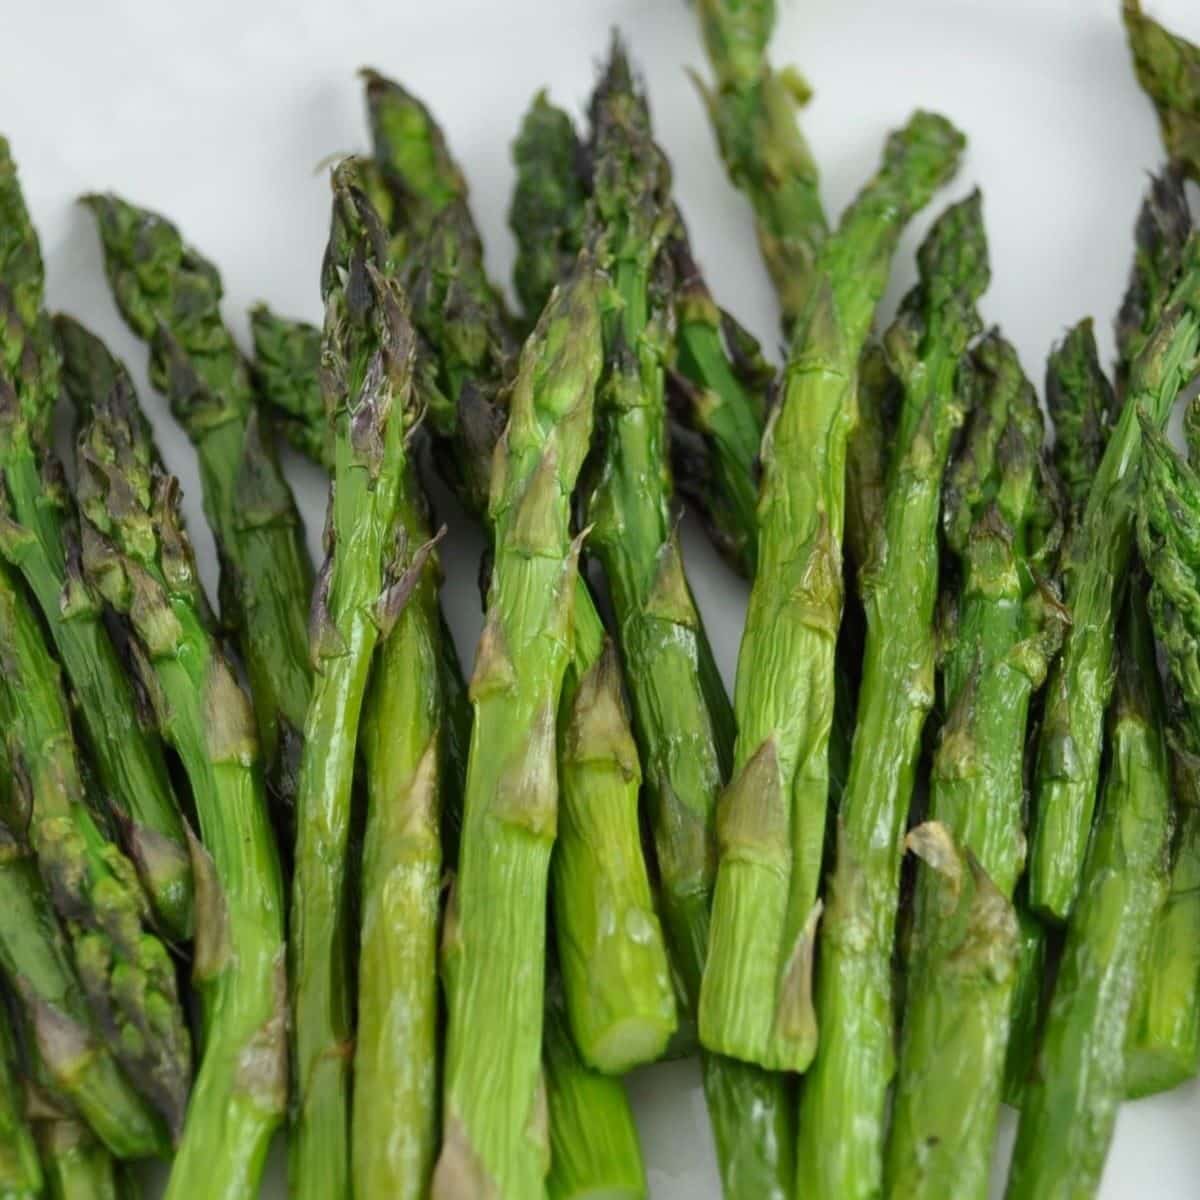 Easy squash casserole recipe side dish idea is air fryer asparagus seasoned with olive oil and sea salt.